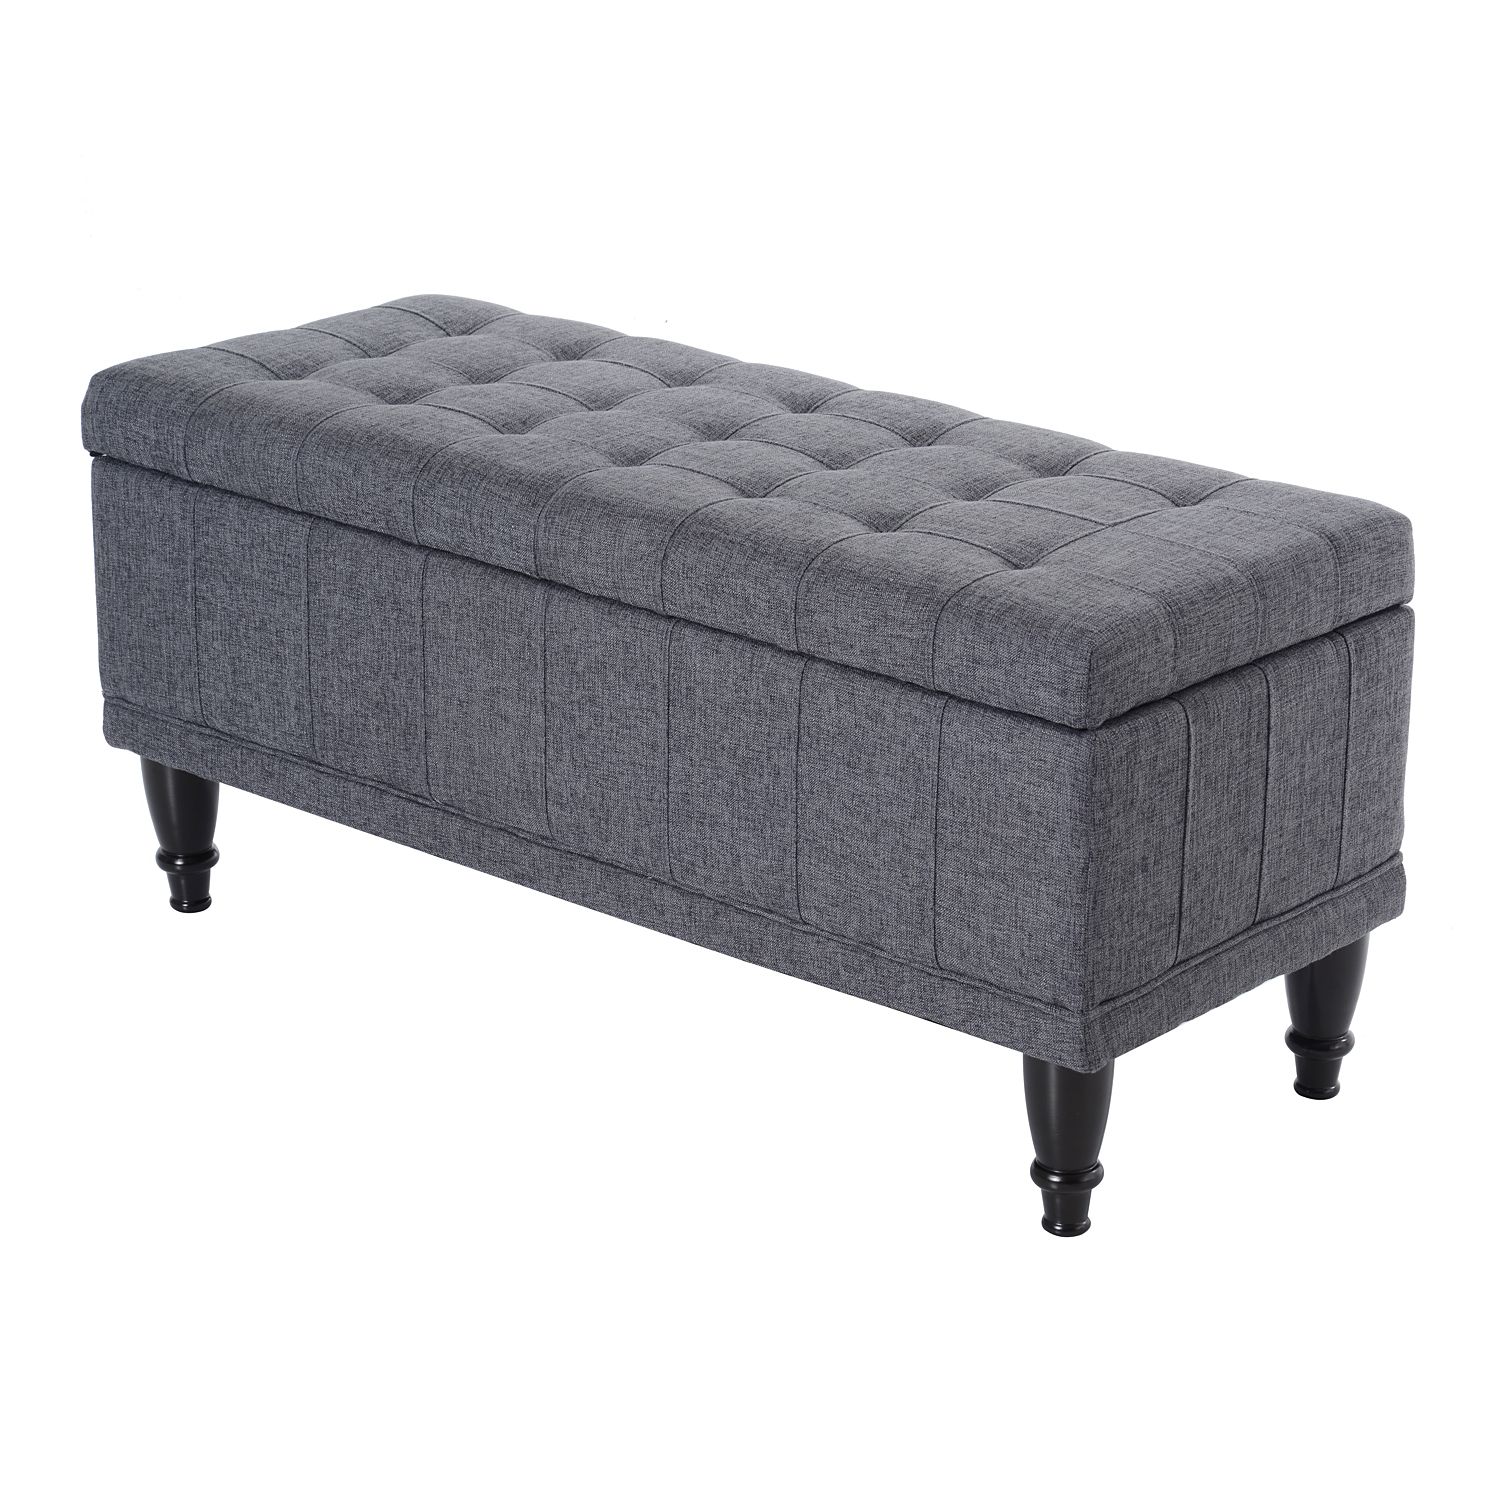 Most Recent Large 42" Tufted Linen Fabric Ottoman Storage Bench – Dark Heather Grey Regarding Snow Tufted Fabric Ottomans (View 2 of 10)